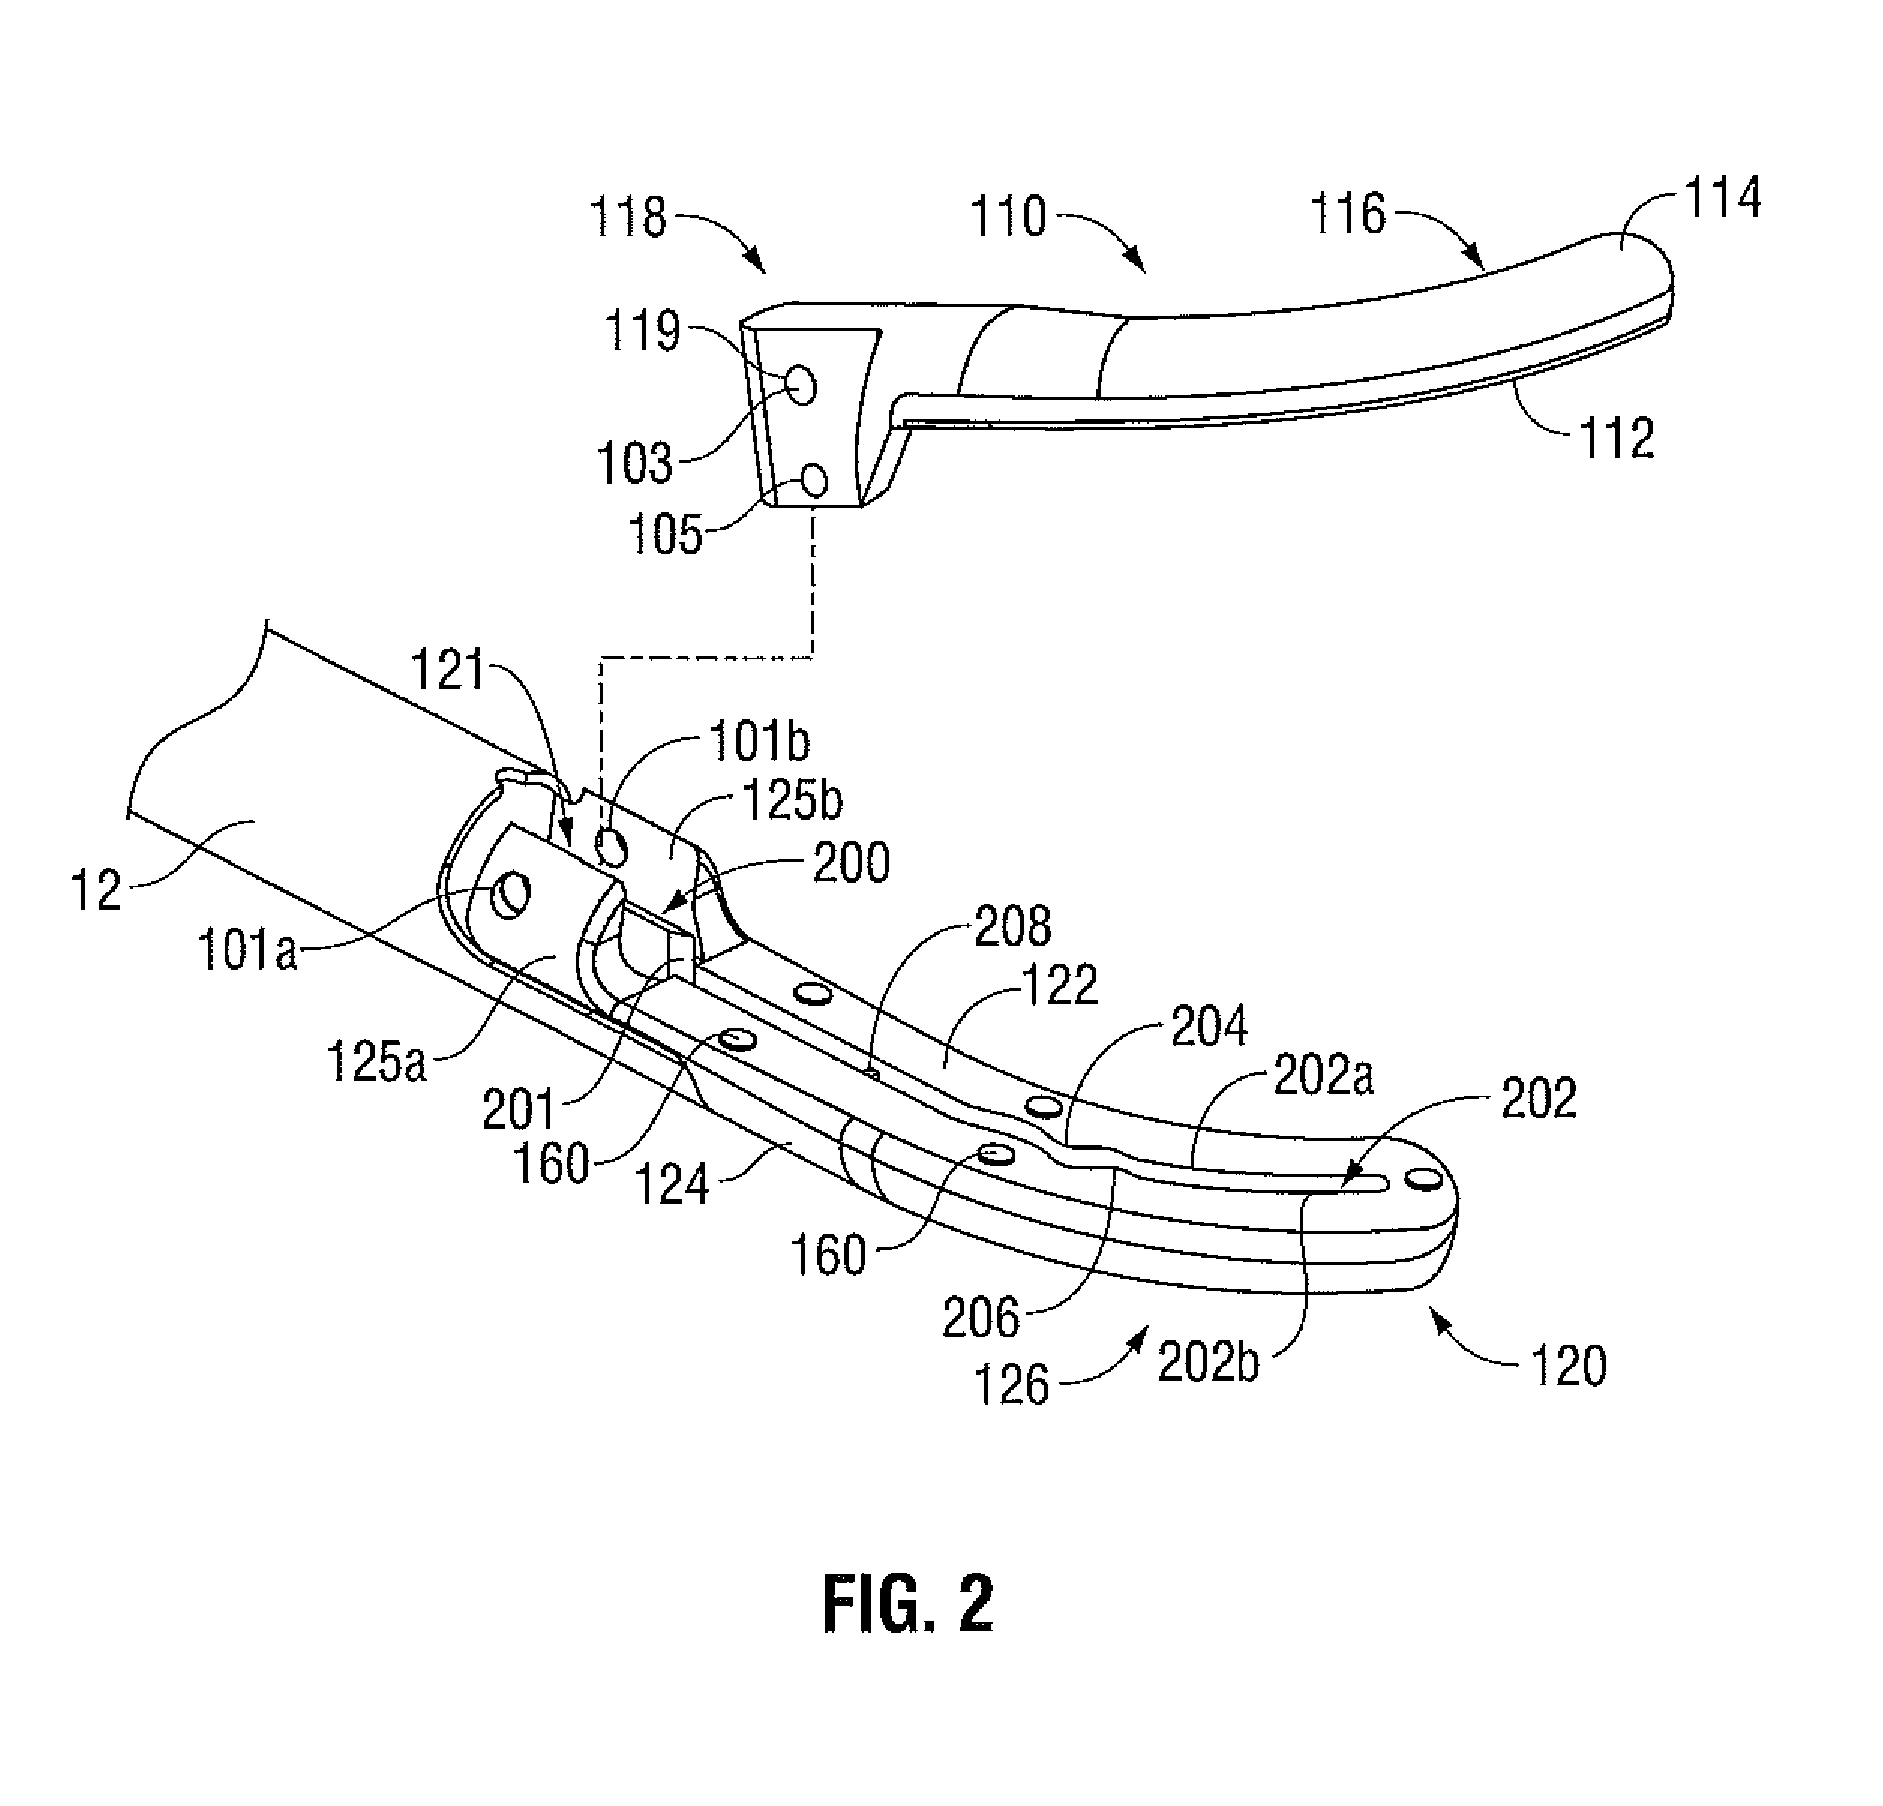 Apparatus and method of controlling cutting blade travel through the use of etched features